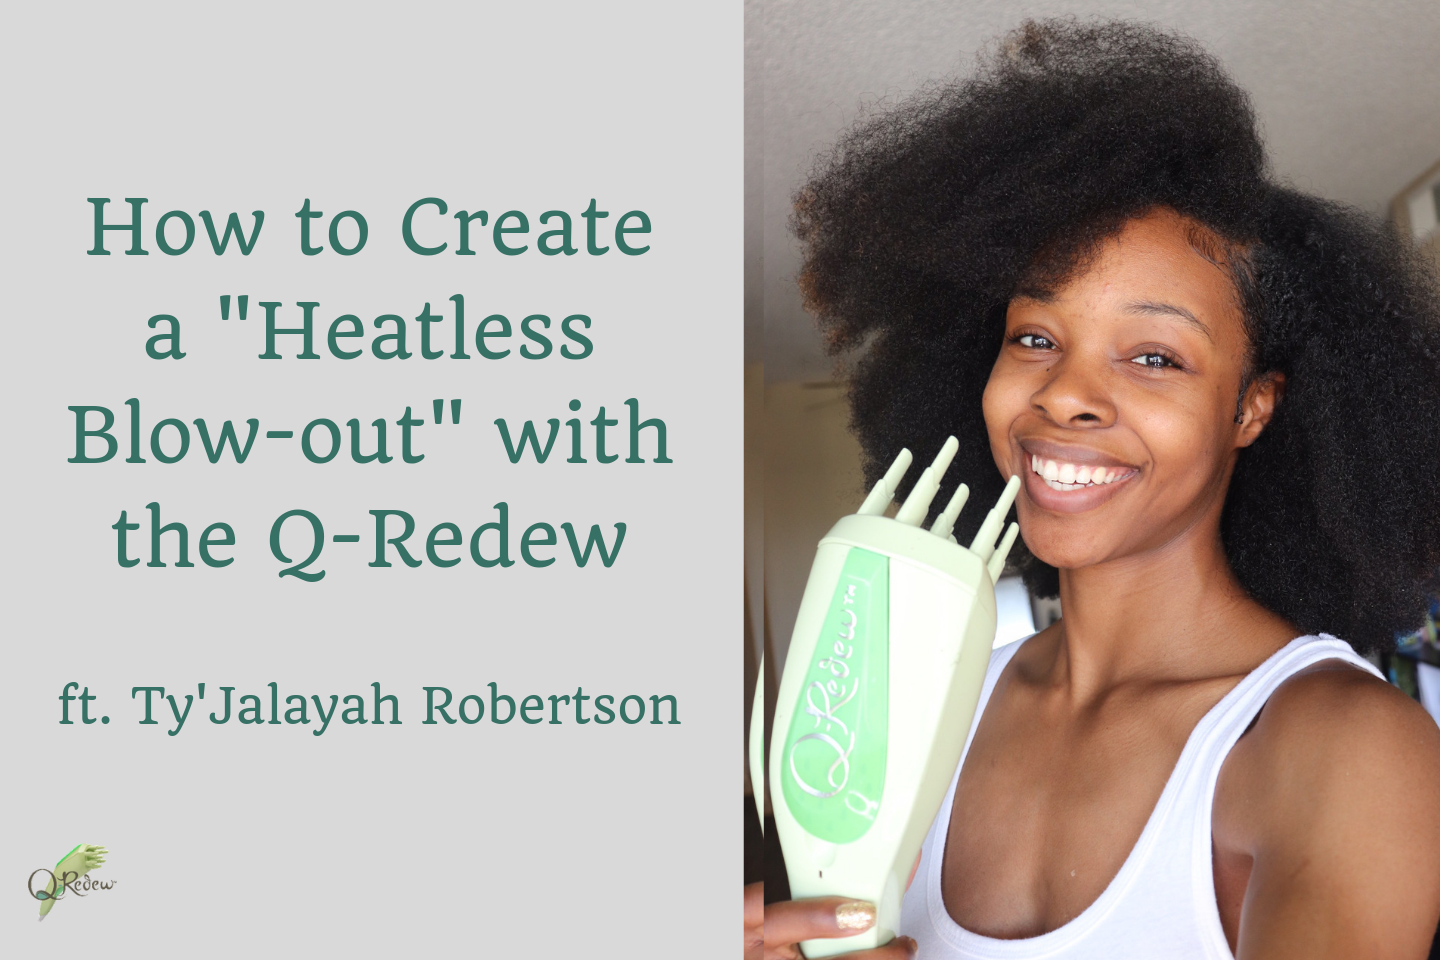 How to Create a "Heatless" Blow-Out with the Q-Redew